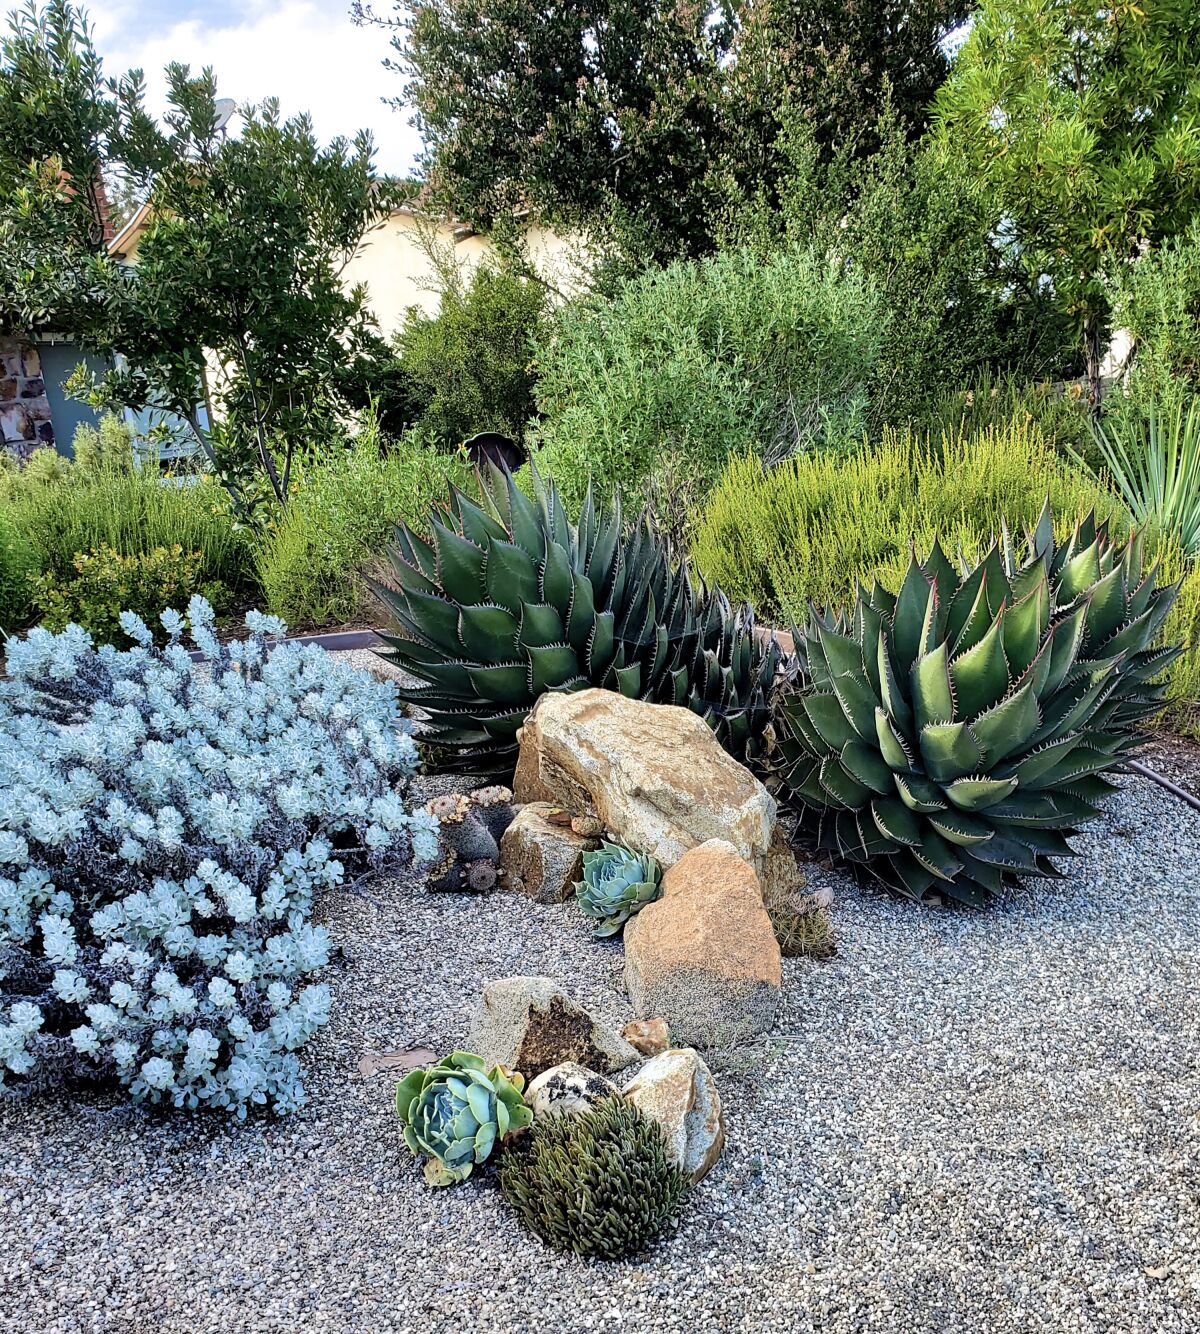 The dramatic texture, shapes and colors of succulents add interest to a garden.